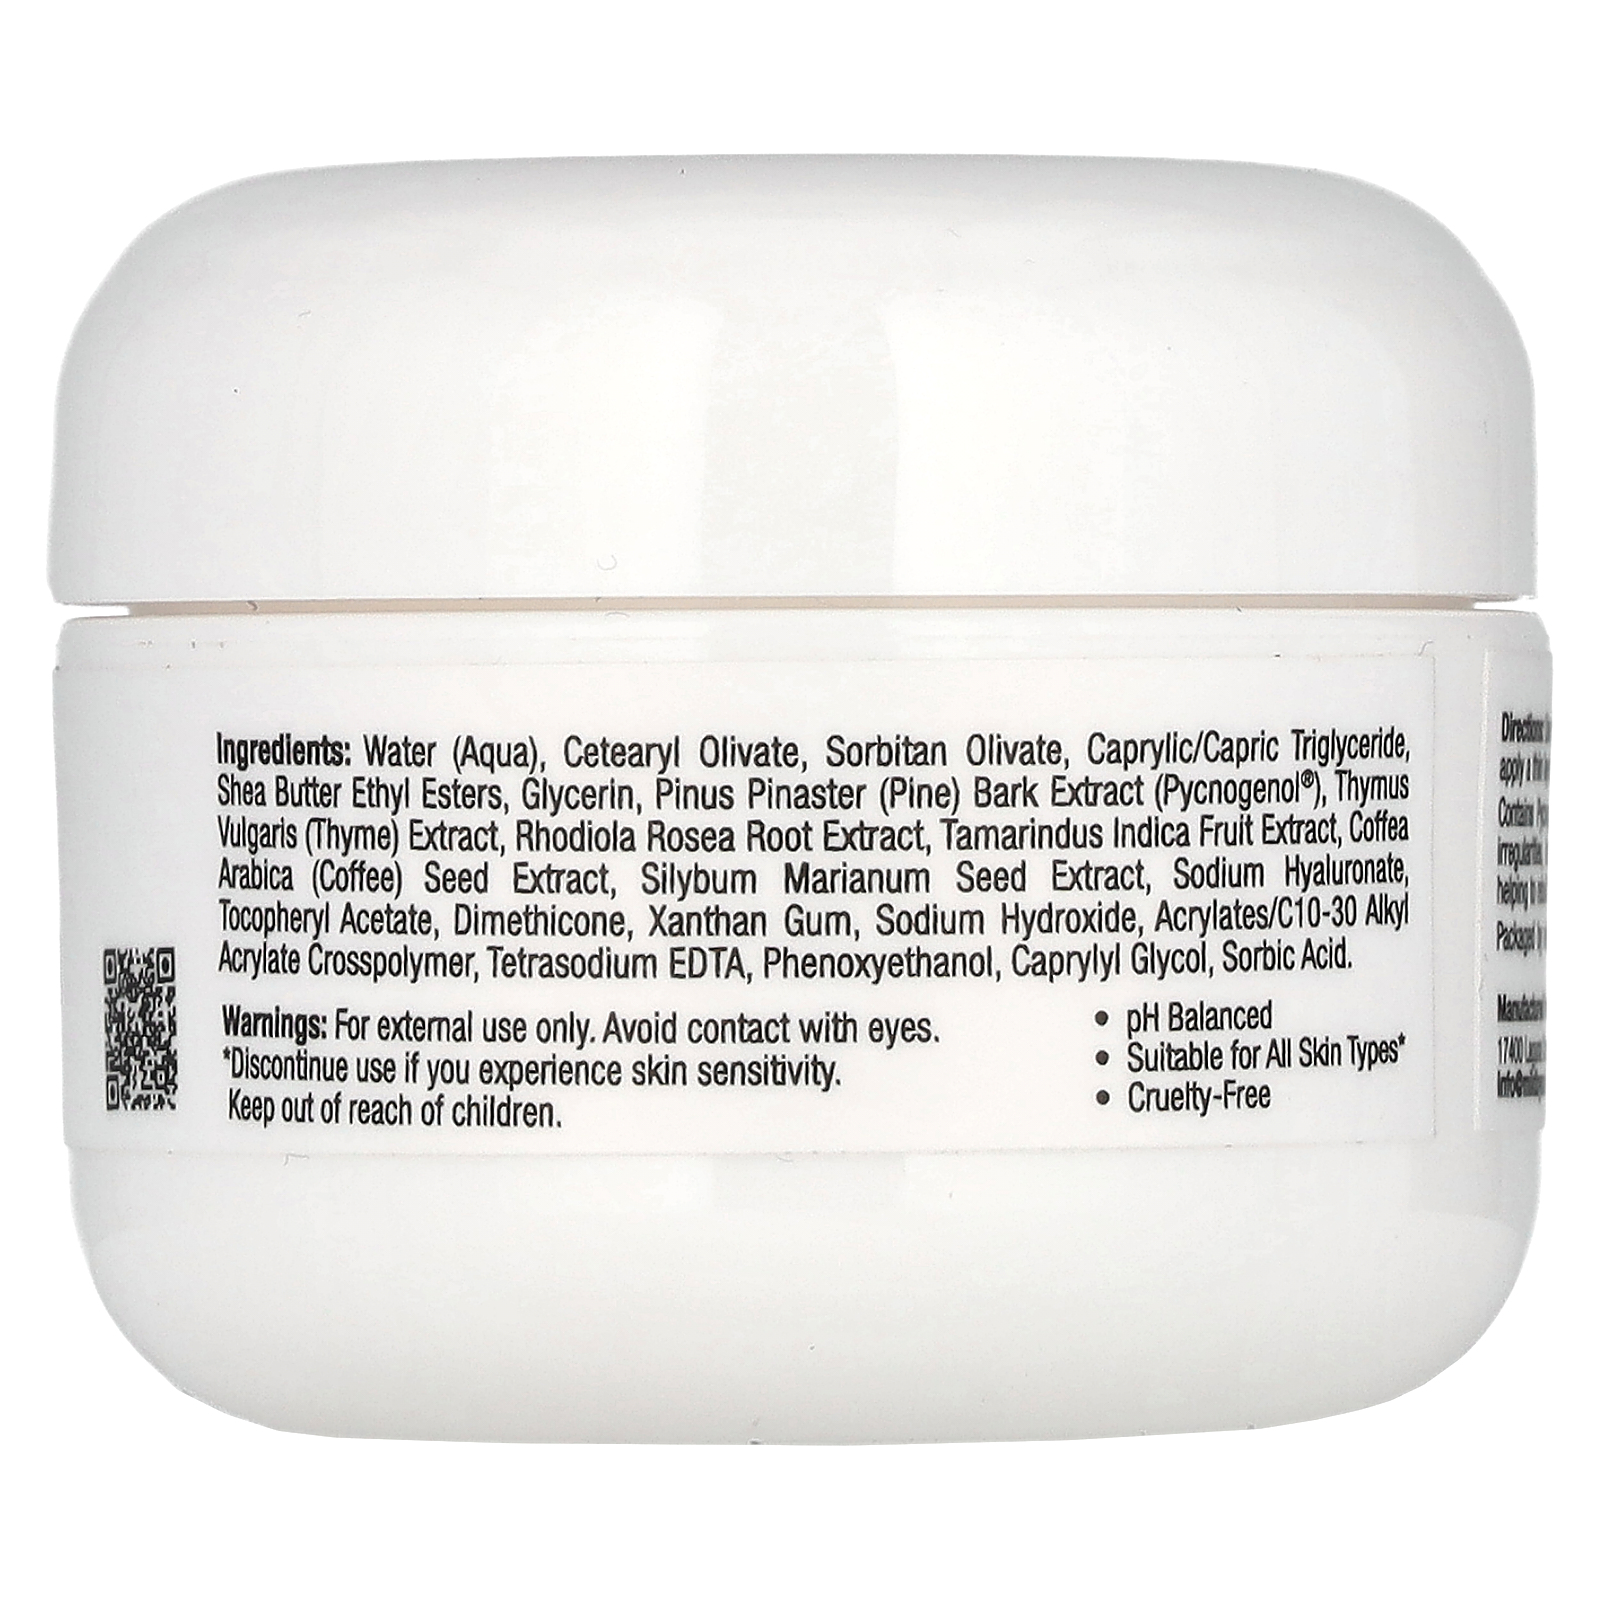 Mild By Nature Pycnogenol Serum (Cream), Soothing and Anti-Aging, 1 oz (28 g) - image 2 of 3